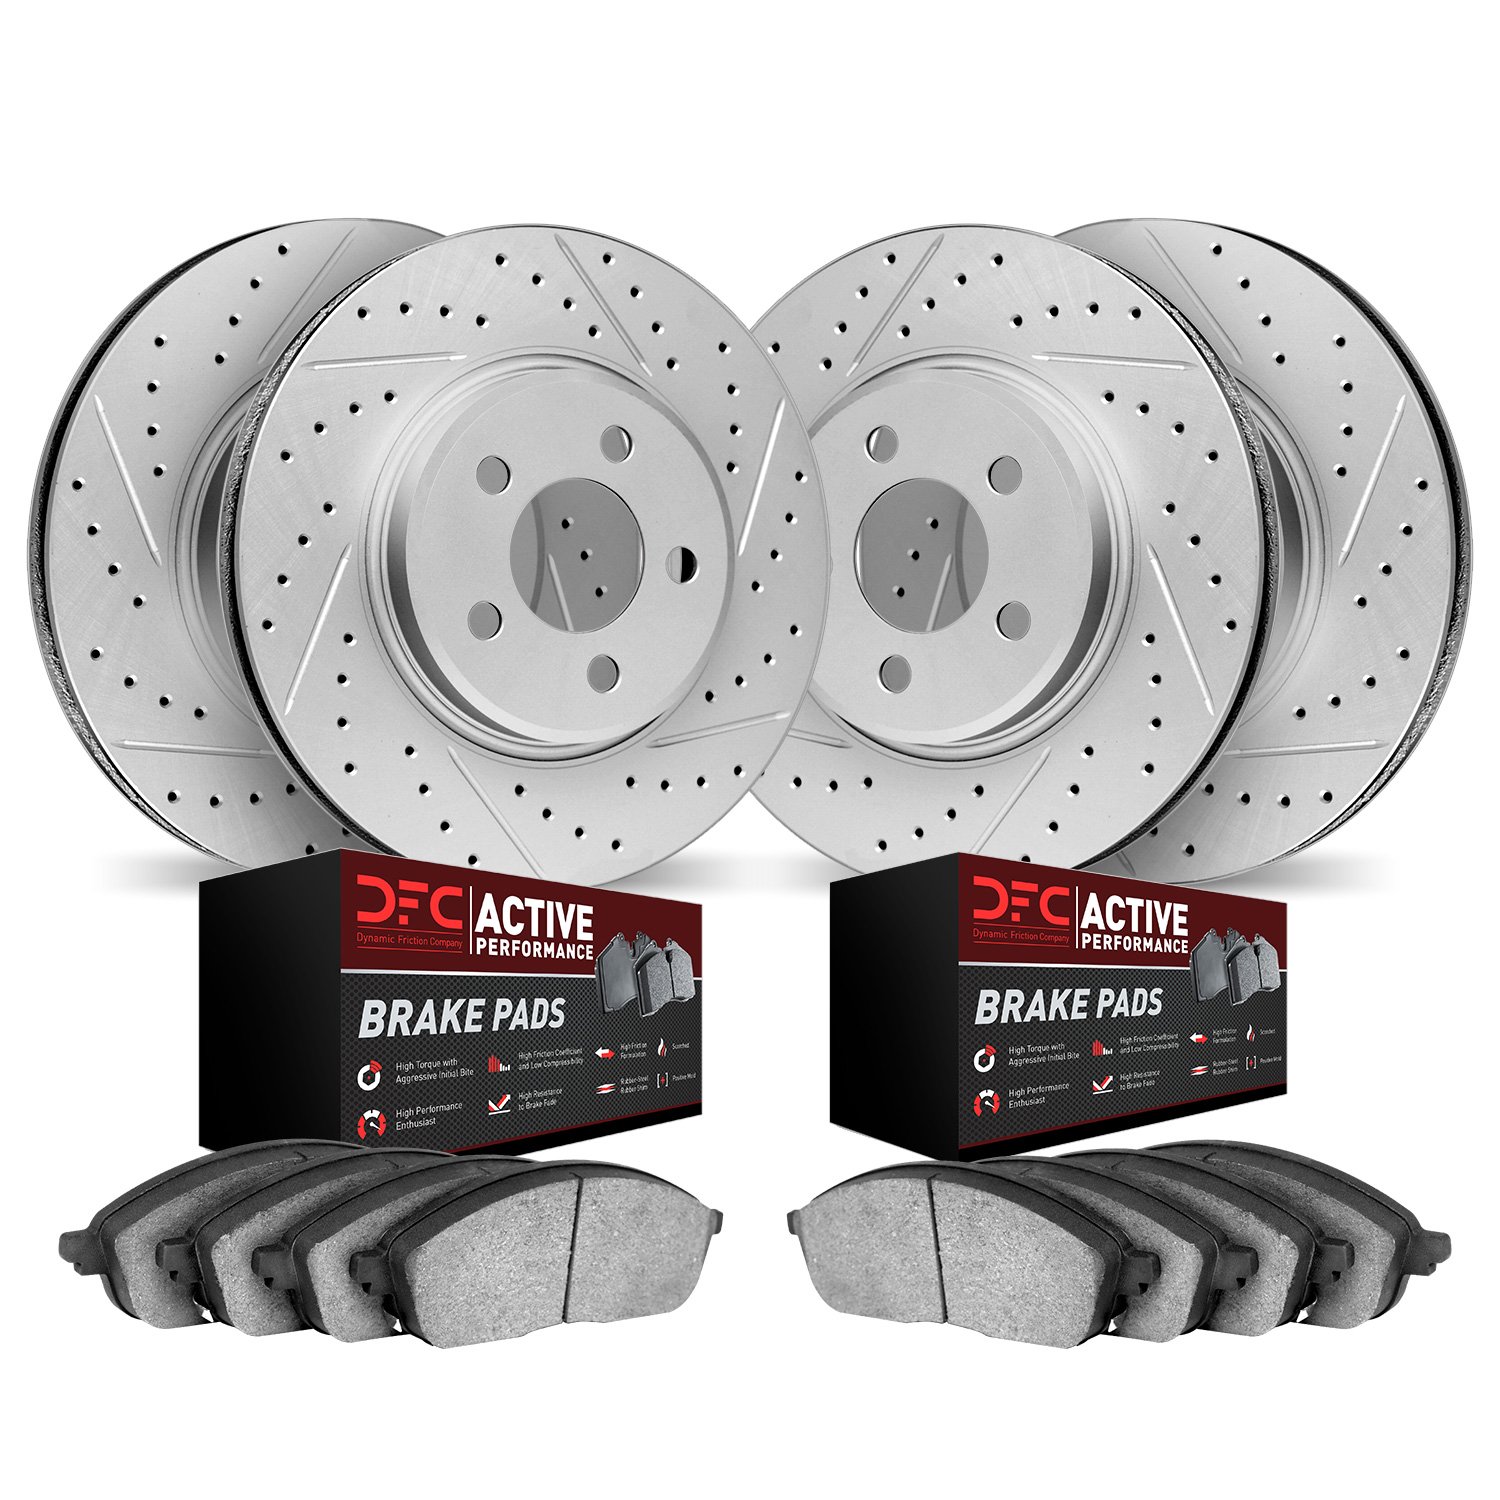 2704-13057 Geoperformance Drilled/Slotted Brake Rotors with Active Performance Pads Kit, 2006-2007 Subaru, Position: Front and R